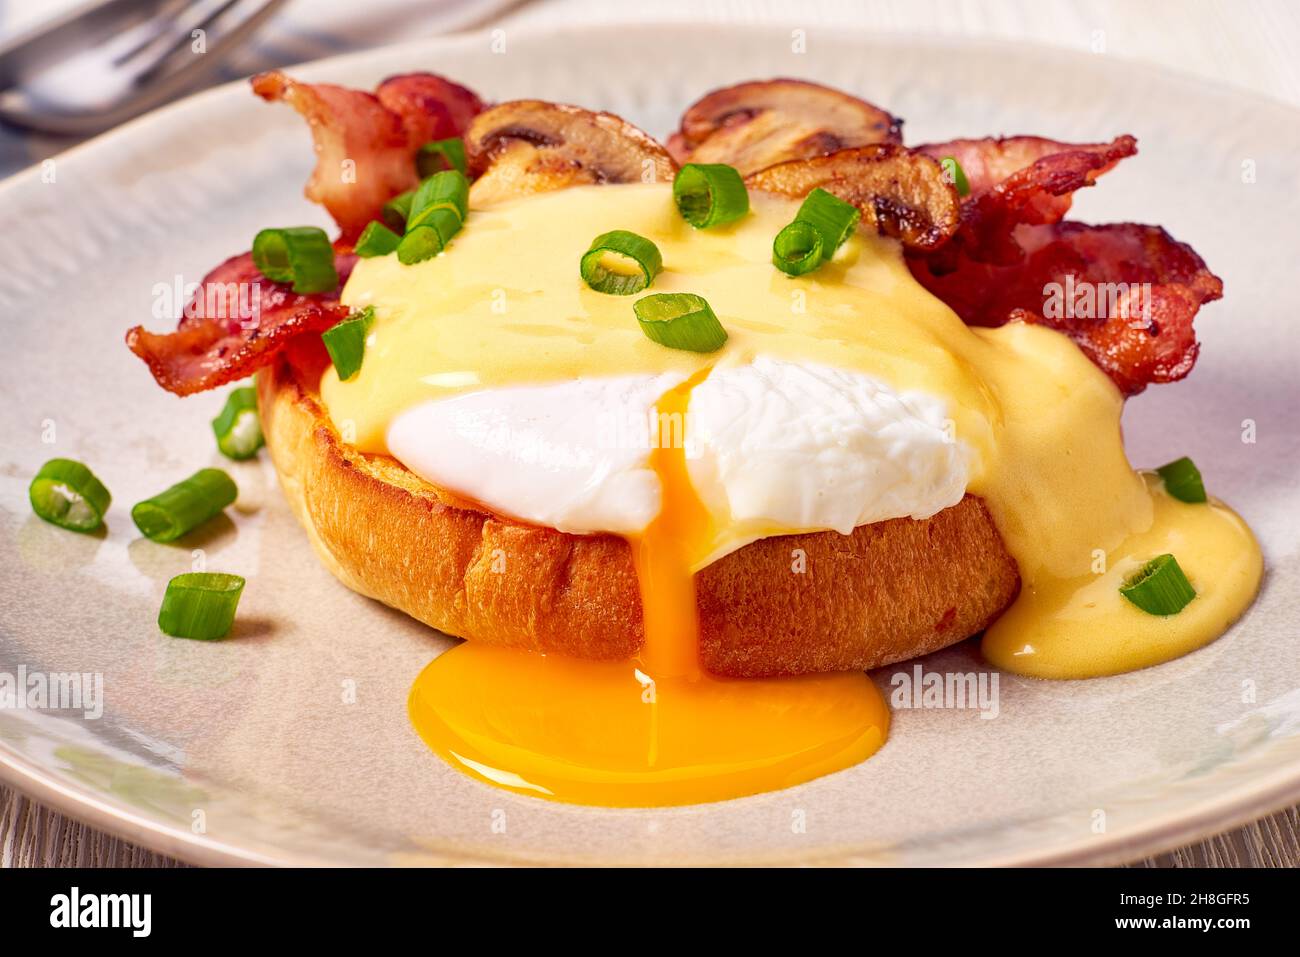 Egg Benedict with fried bacon and hollandaise sauce Stock Photo